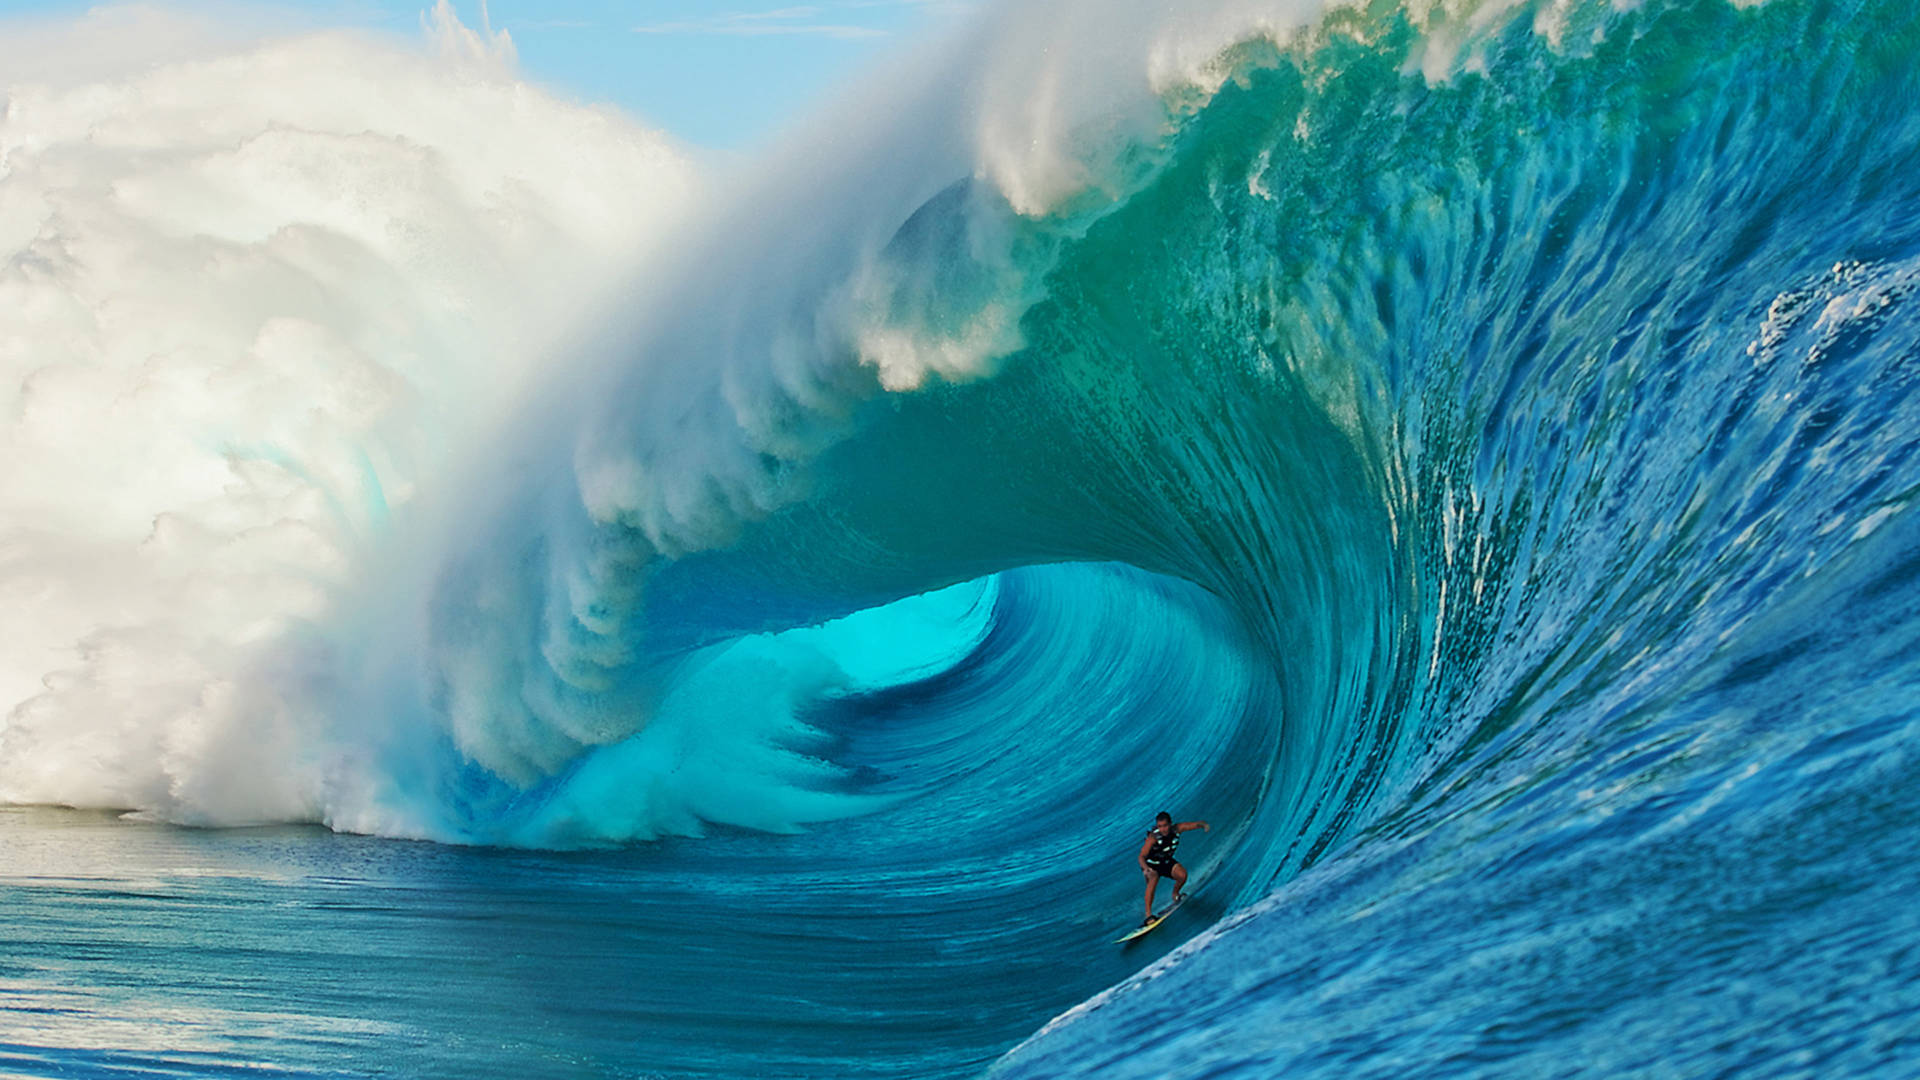 Ultra Hd Surfing In Wave Laptop Background